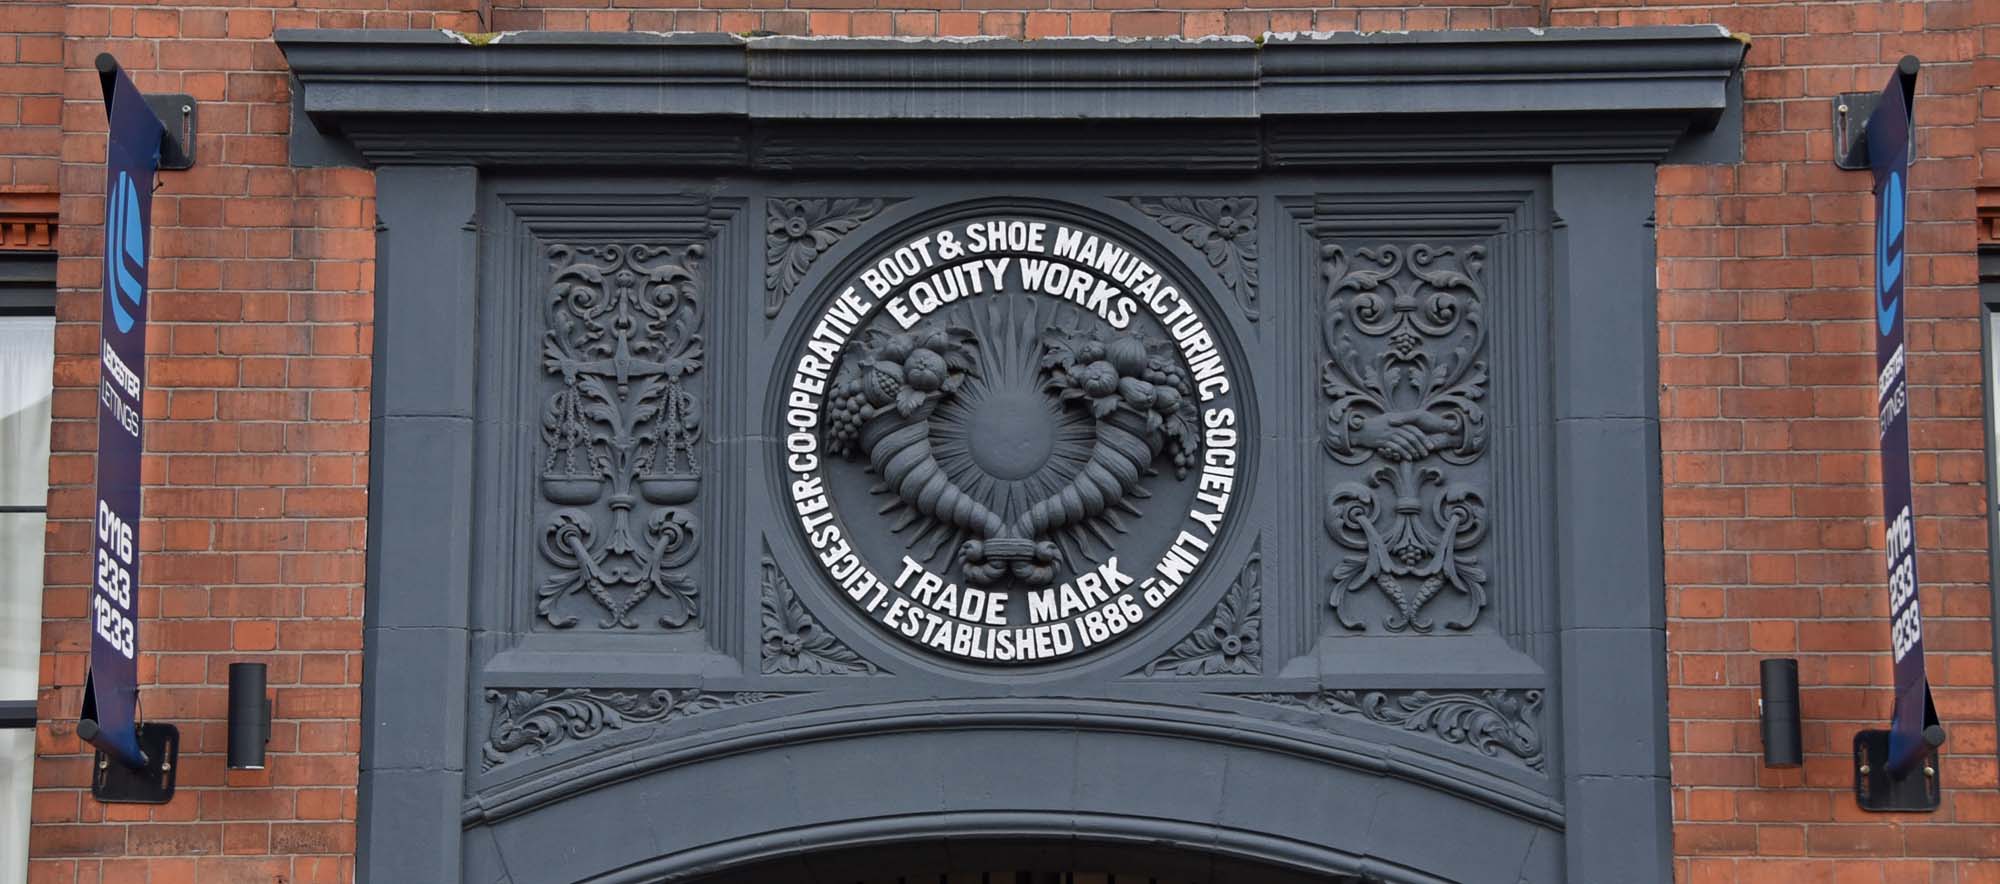 The entrance to the former Equity Shoes Factory on Western Road